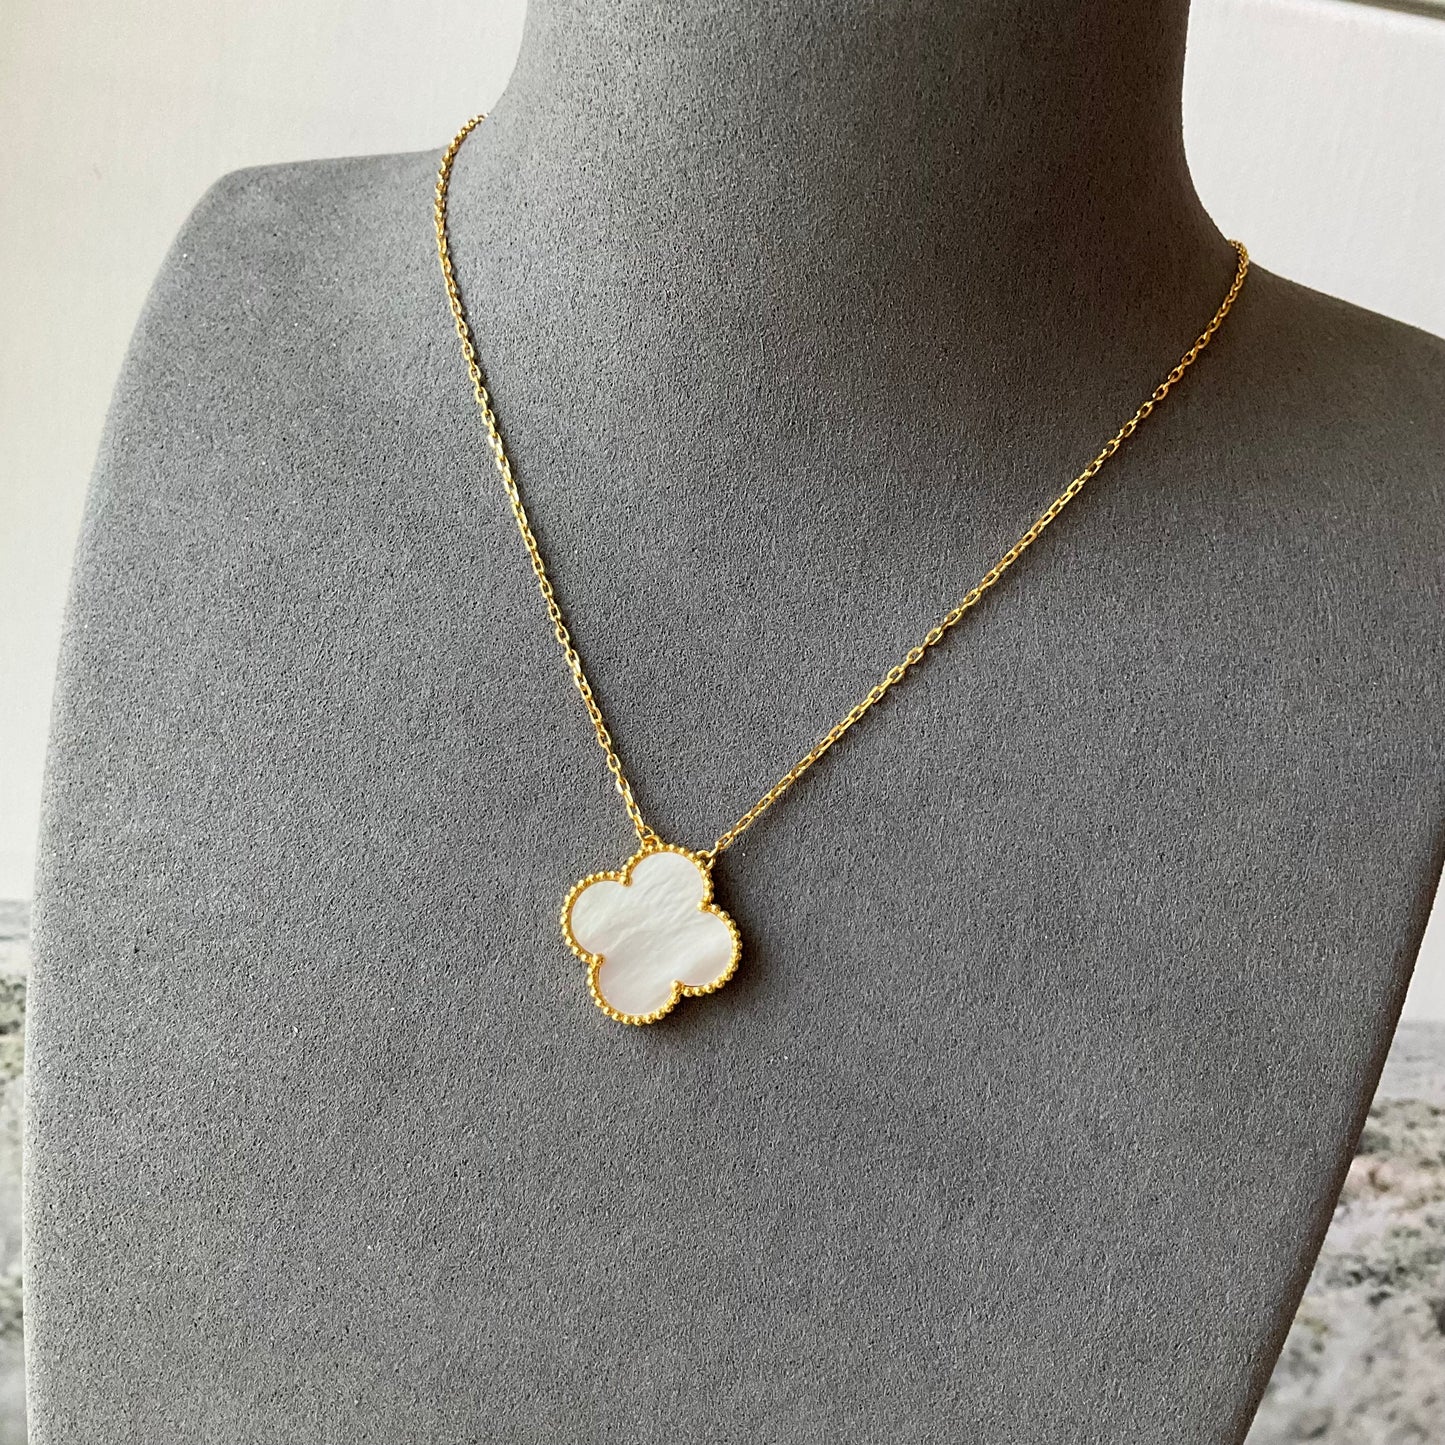 20mm Gemstone Clover Necklace, 18k Gold Plated, 925 Sterling Silver 42cm long